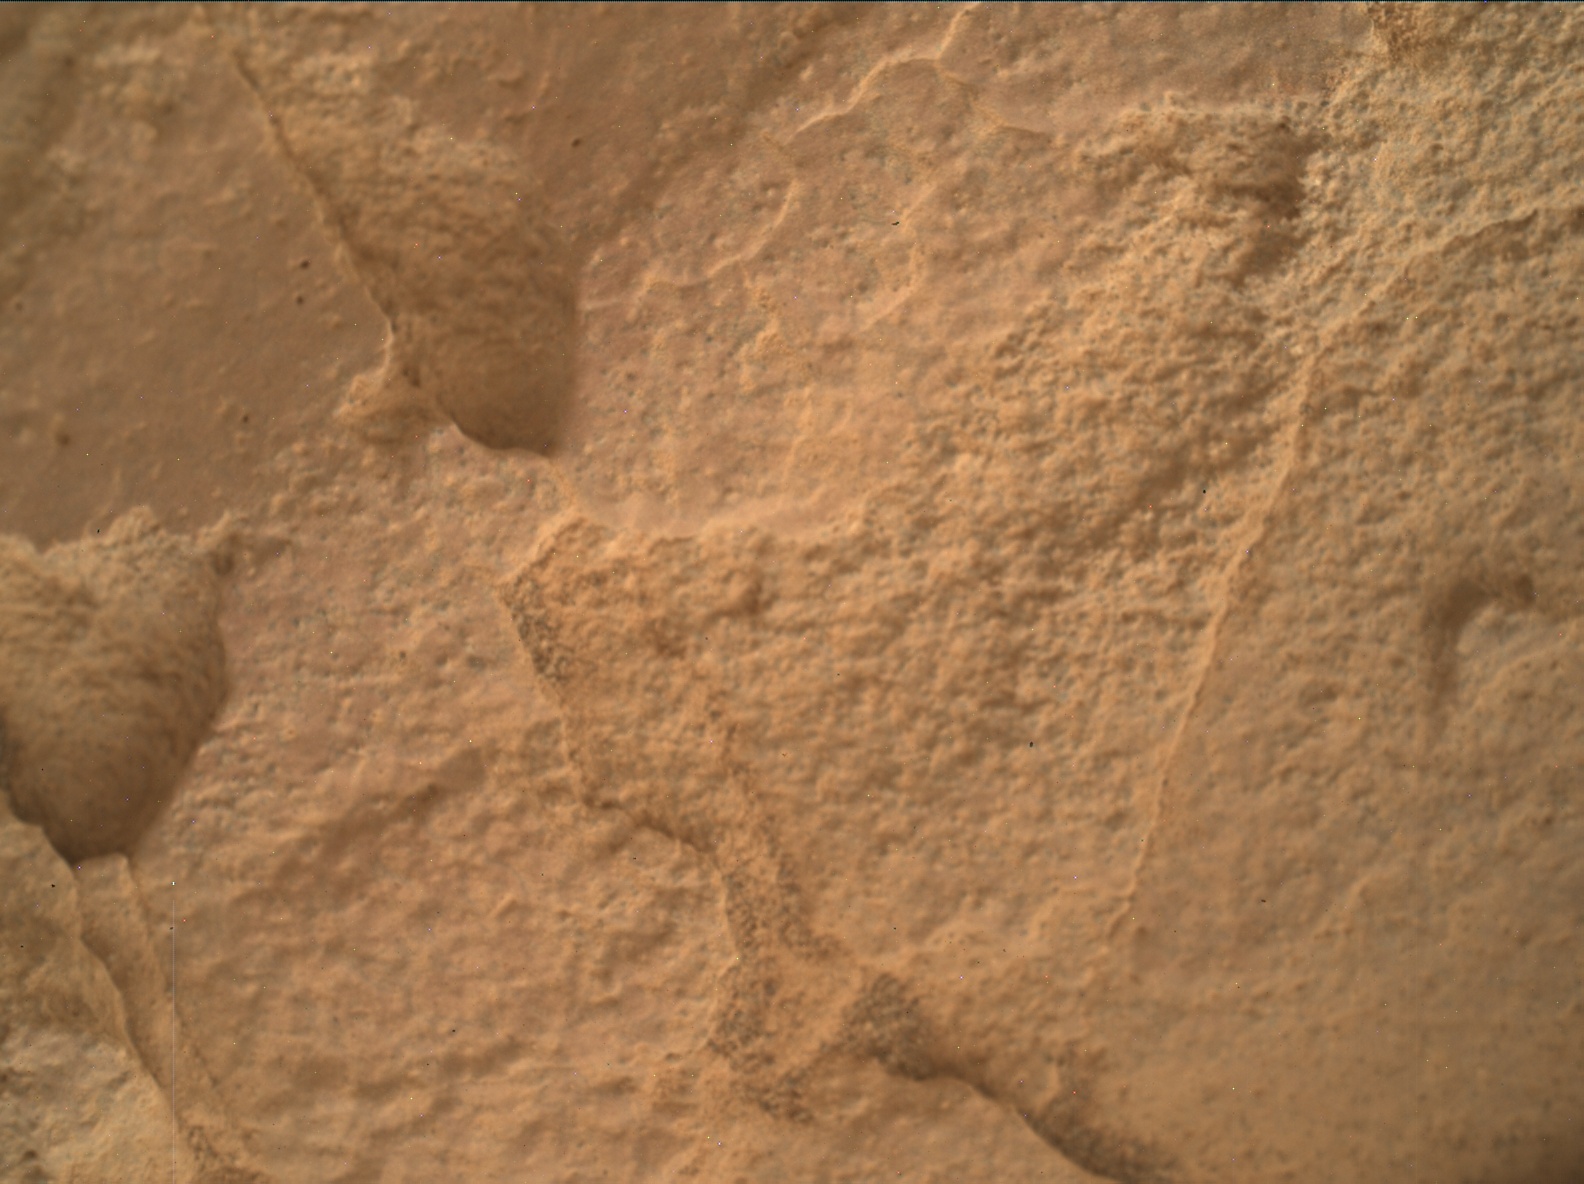 Nasa's Mars rover Curiosity acquired this image using its Mars Hand Lens Imager (MAHLI) on Sol 3364